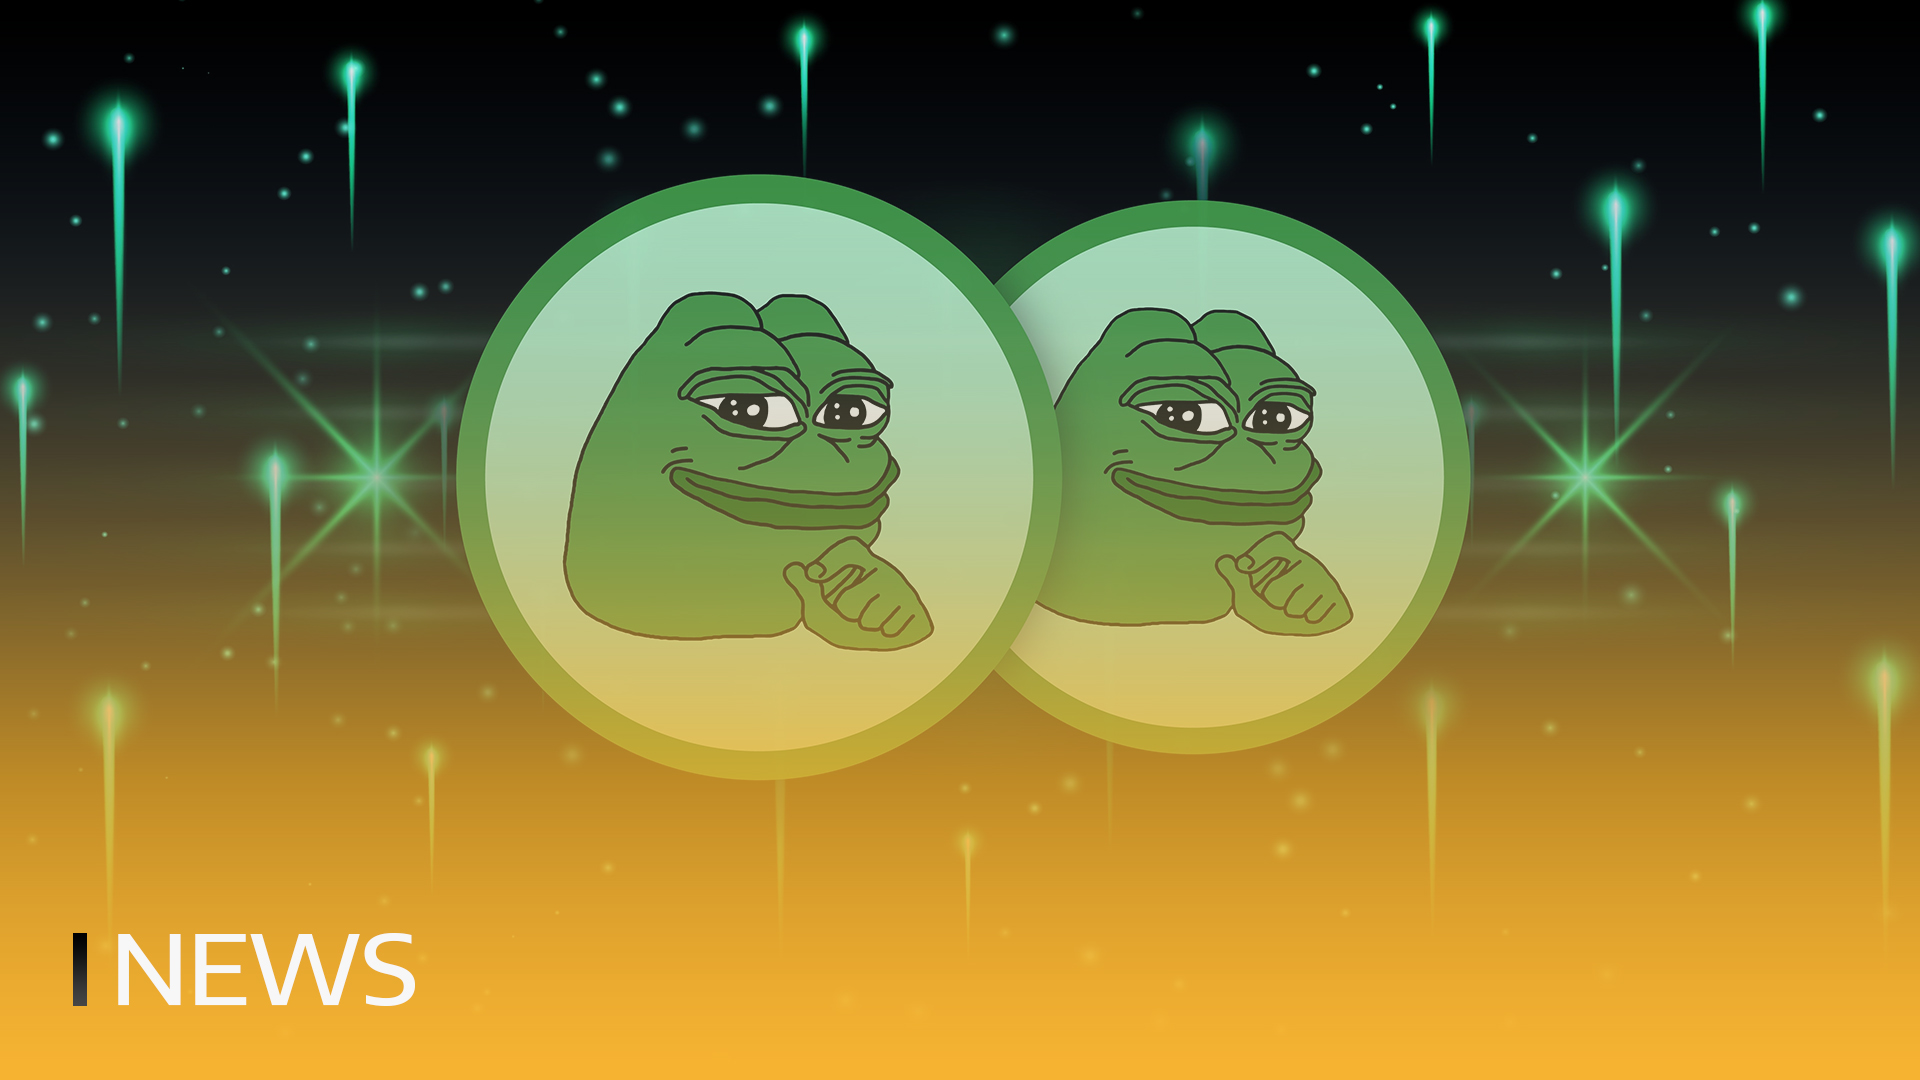 PEPE Reaches New All-time High